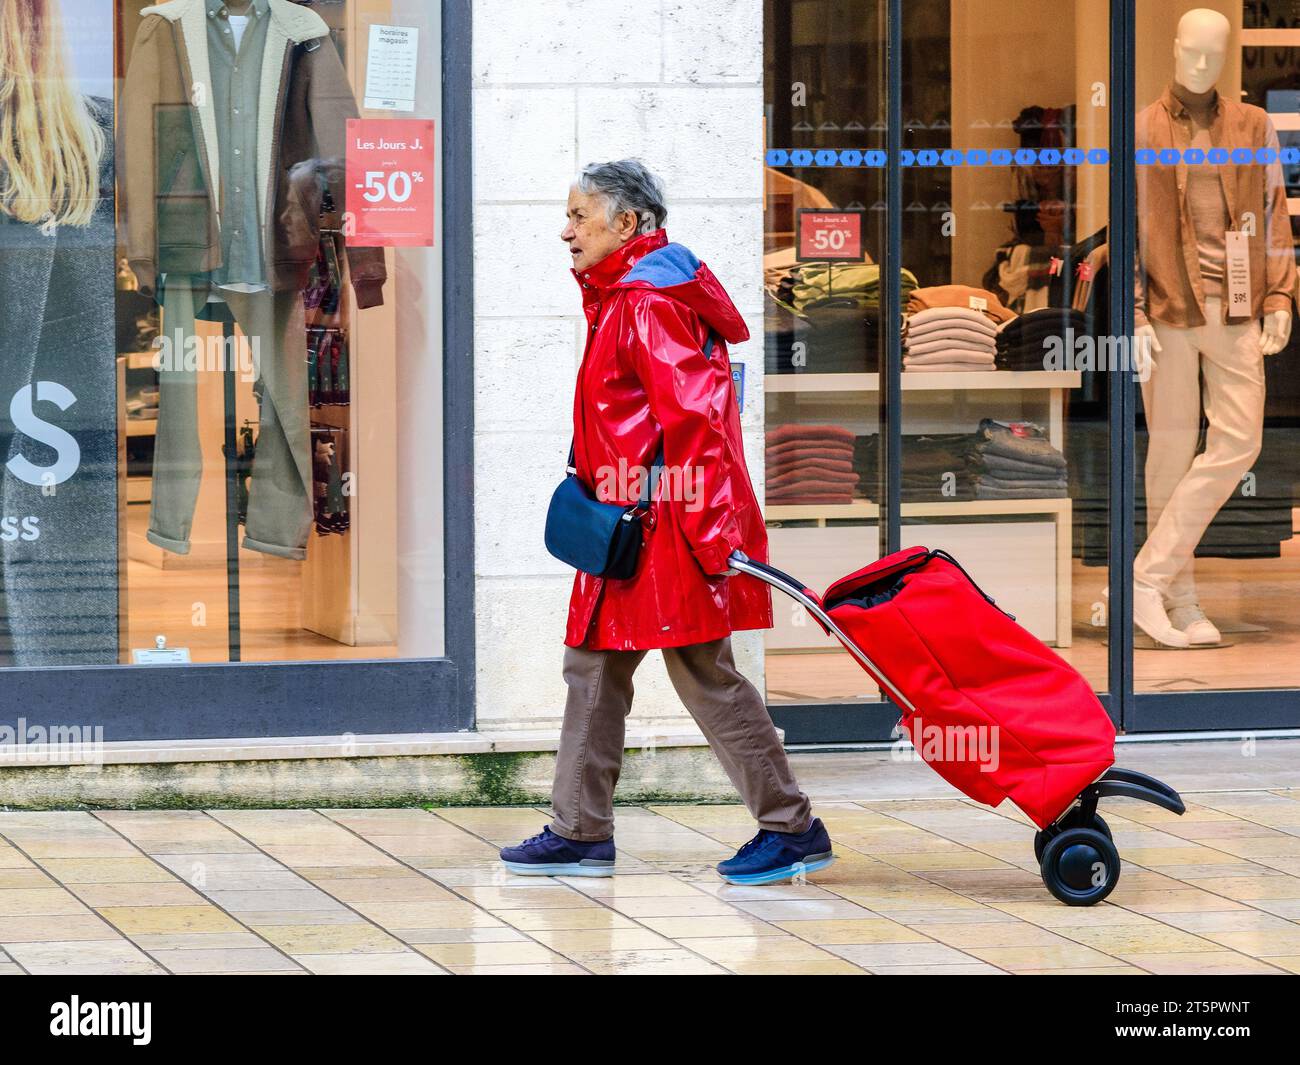 Elderly woman in red plastic rainwear pulling red shopping trolley along city pavement - Tours, Indre-et-Loire (37), France. Stock Photo